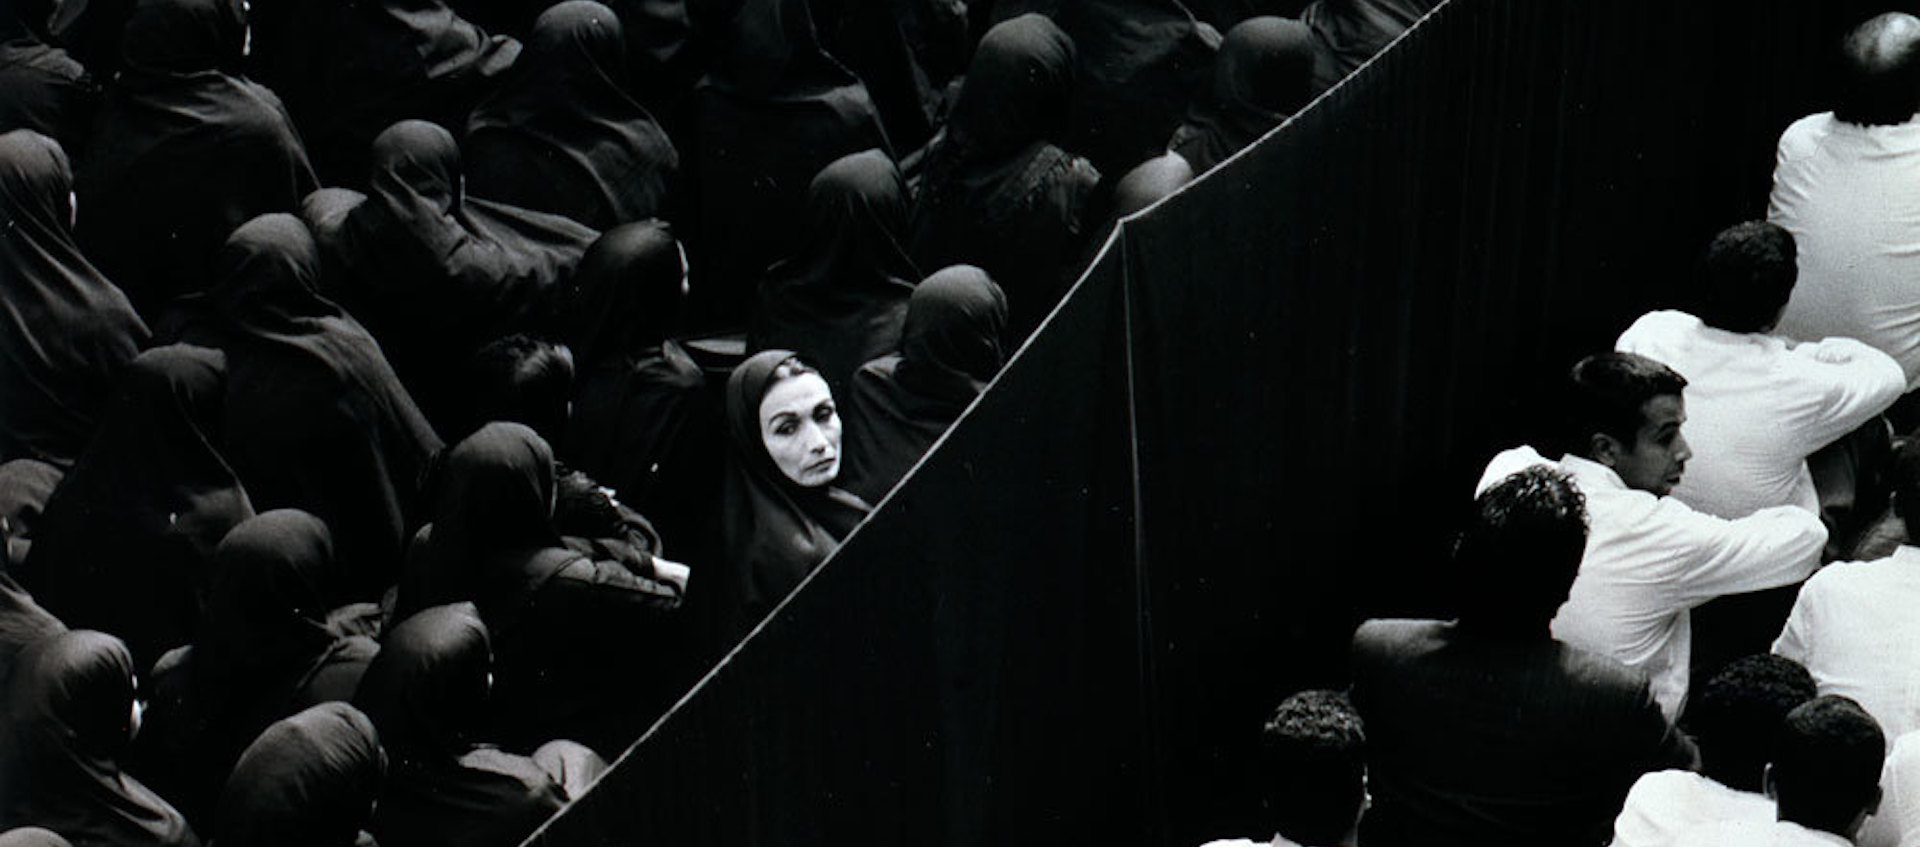 A black and white dual projection image of gender-segregated crowds from the Shirin Neshat video installation Fervor